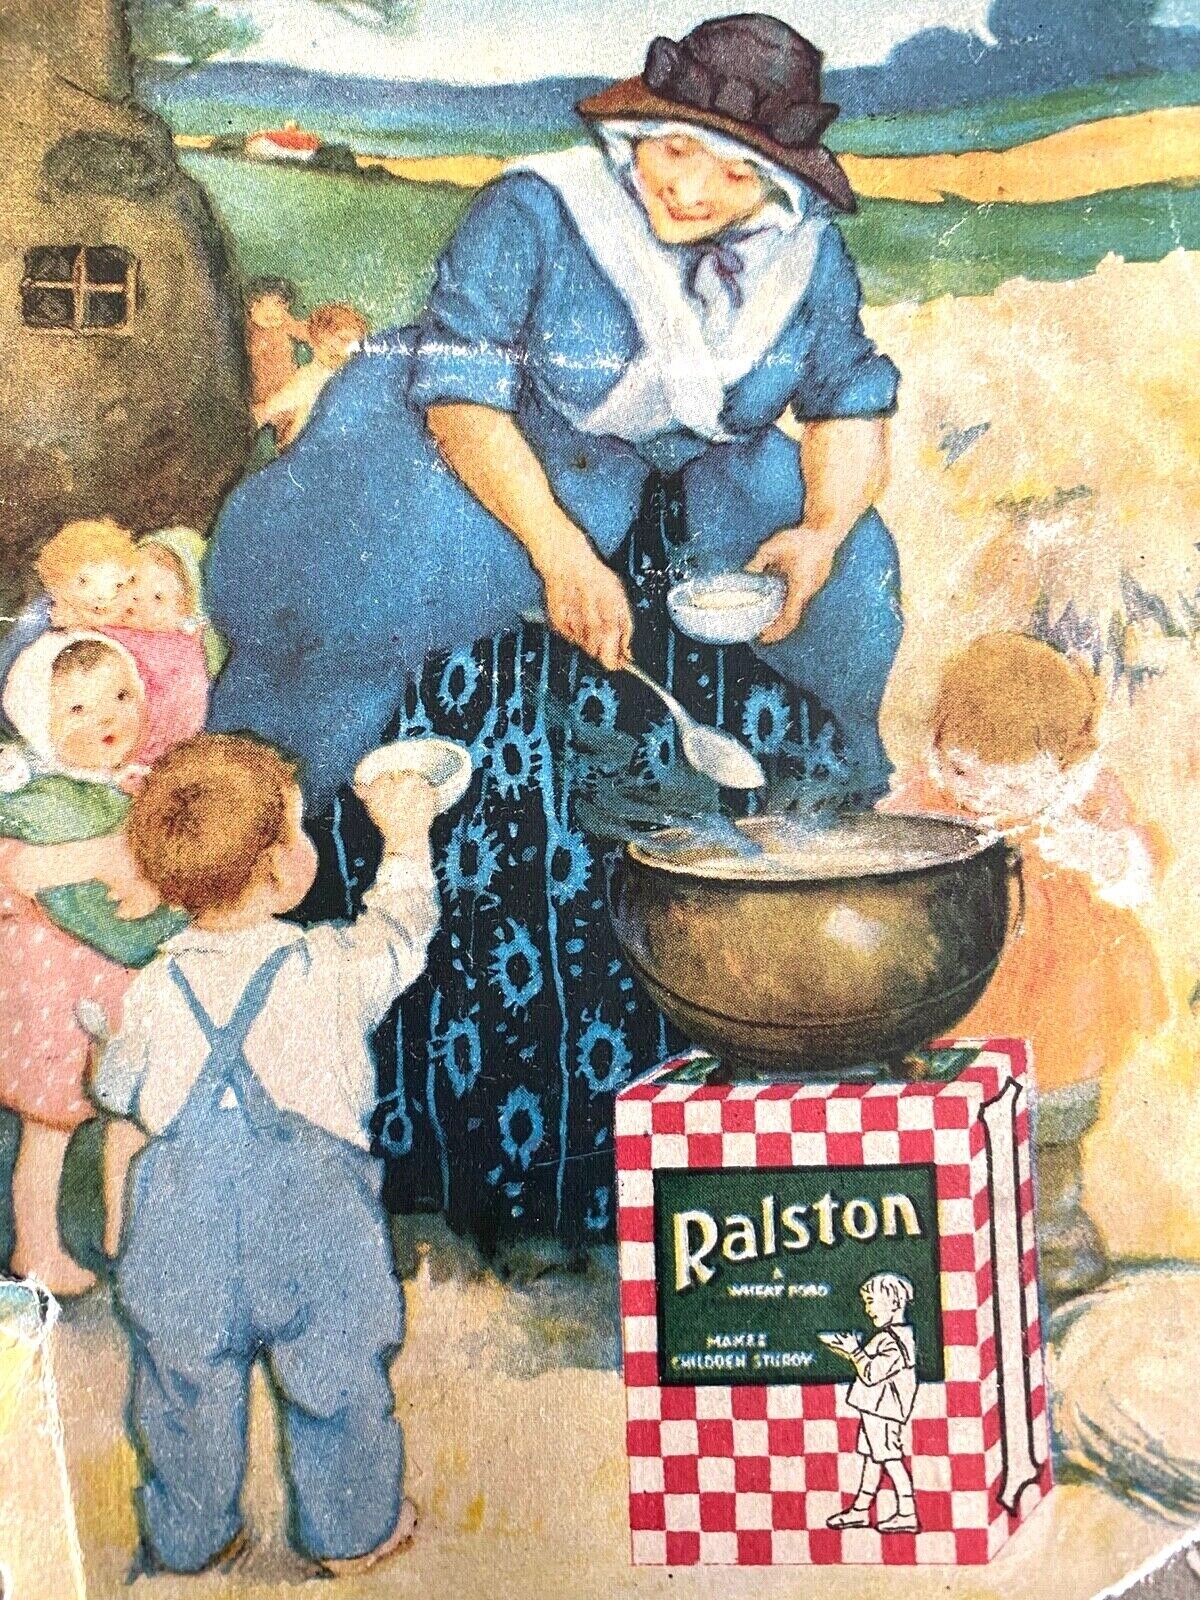 1922 RALSTON RECIPES antique cookbook PURINA WHEAT CO. Nursery Rhymes + Drawings